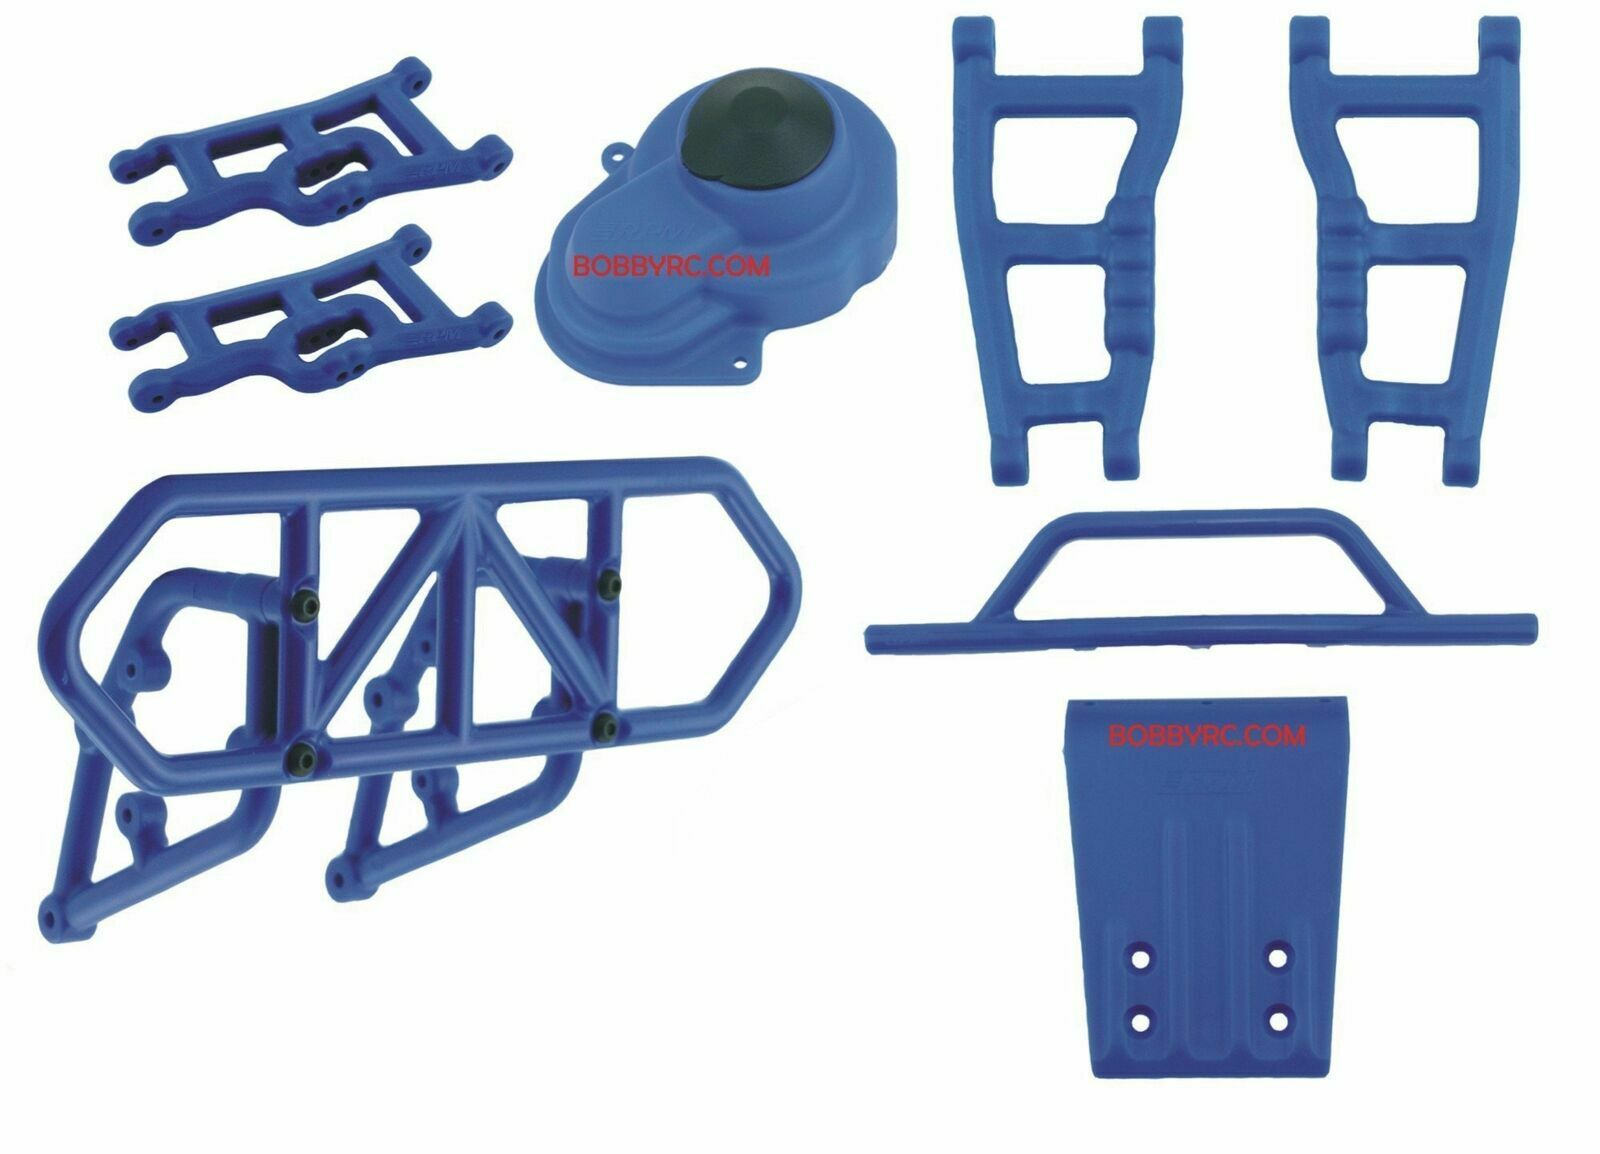 RPM BLUE Suspension Arms, Gear Cover, Front & Rear Bumpers For Traxxas 2wd Slash